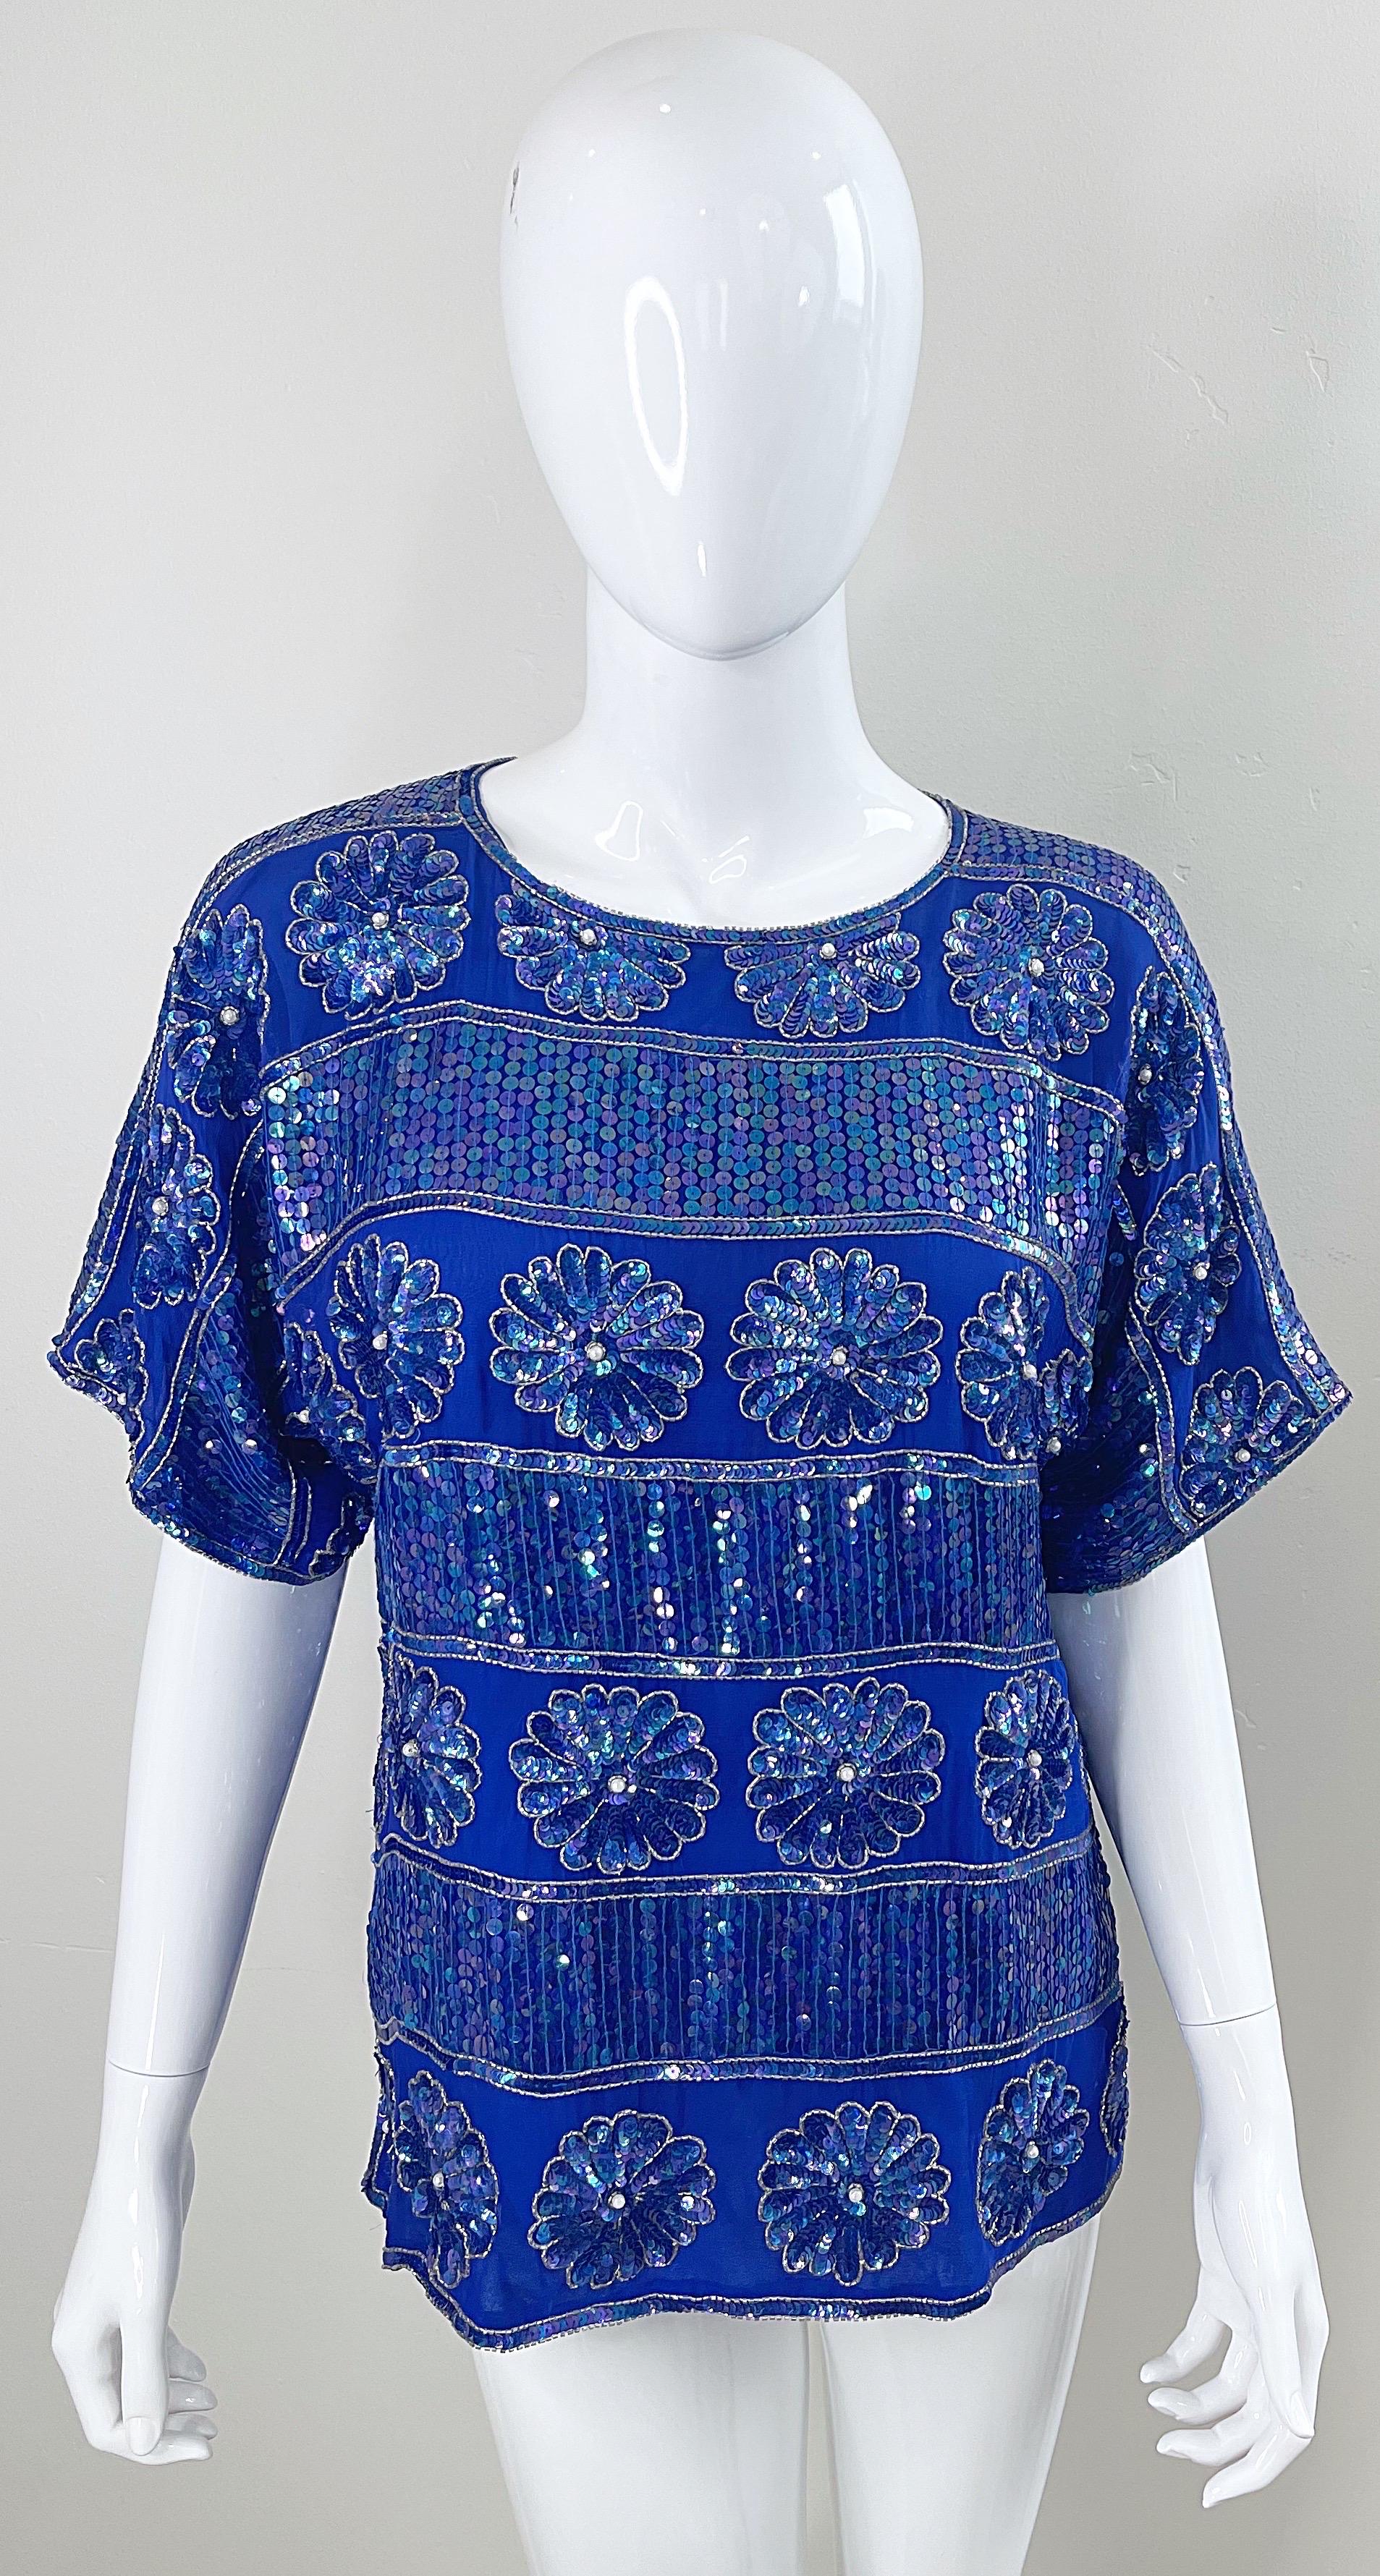 1980s Royal Blue Silk Chiffon Sequin Beaded Pearl Vintage 80s Blouse Shirt Top For Sale 10